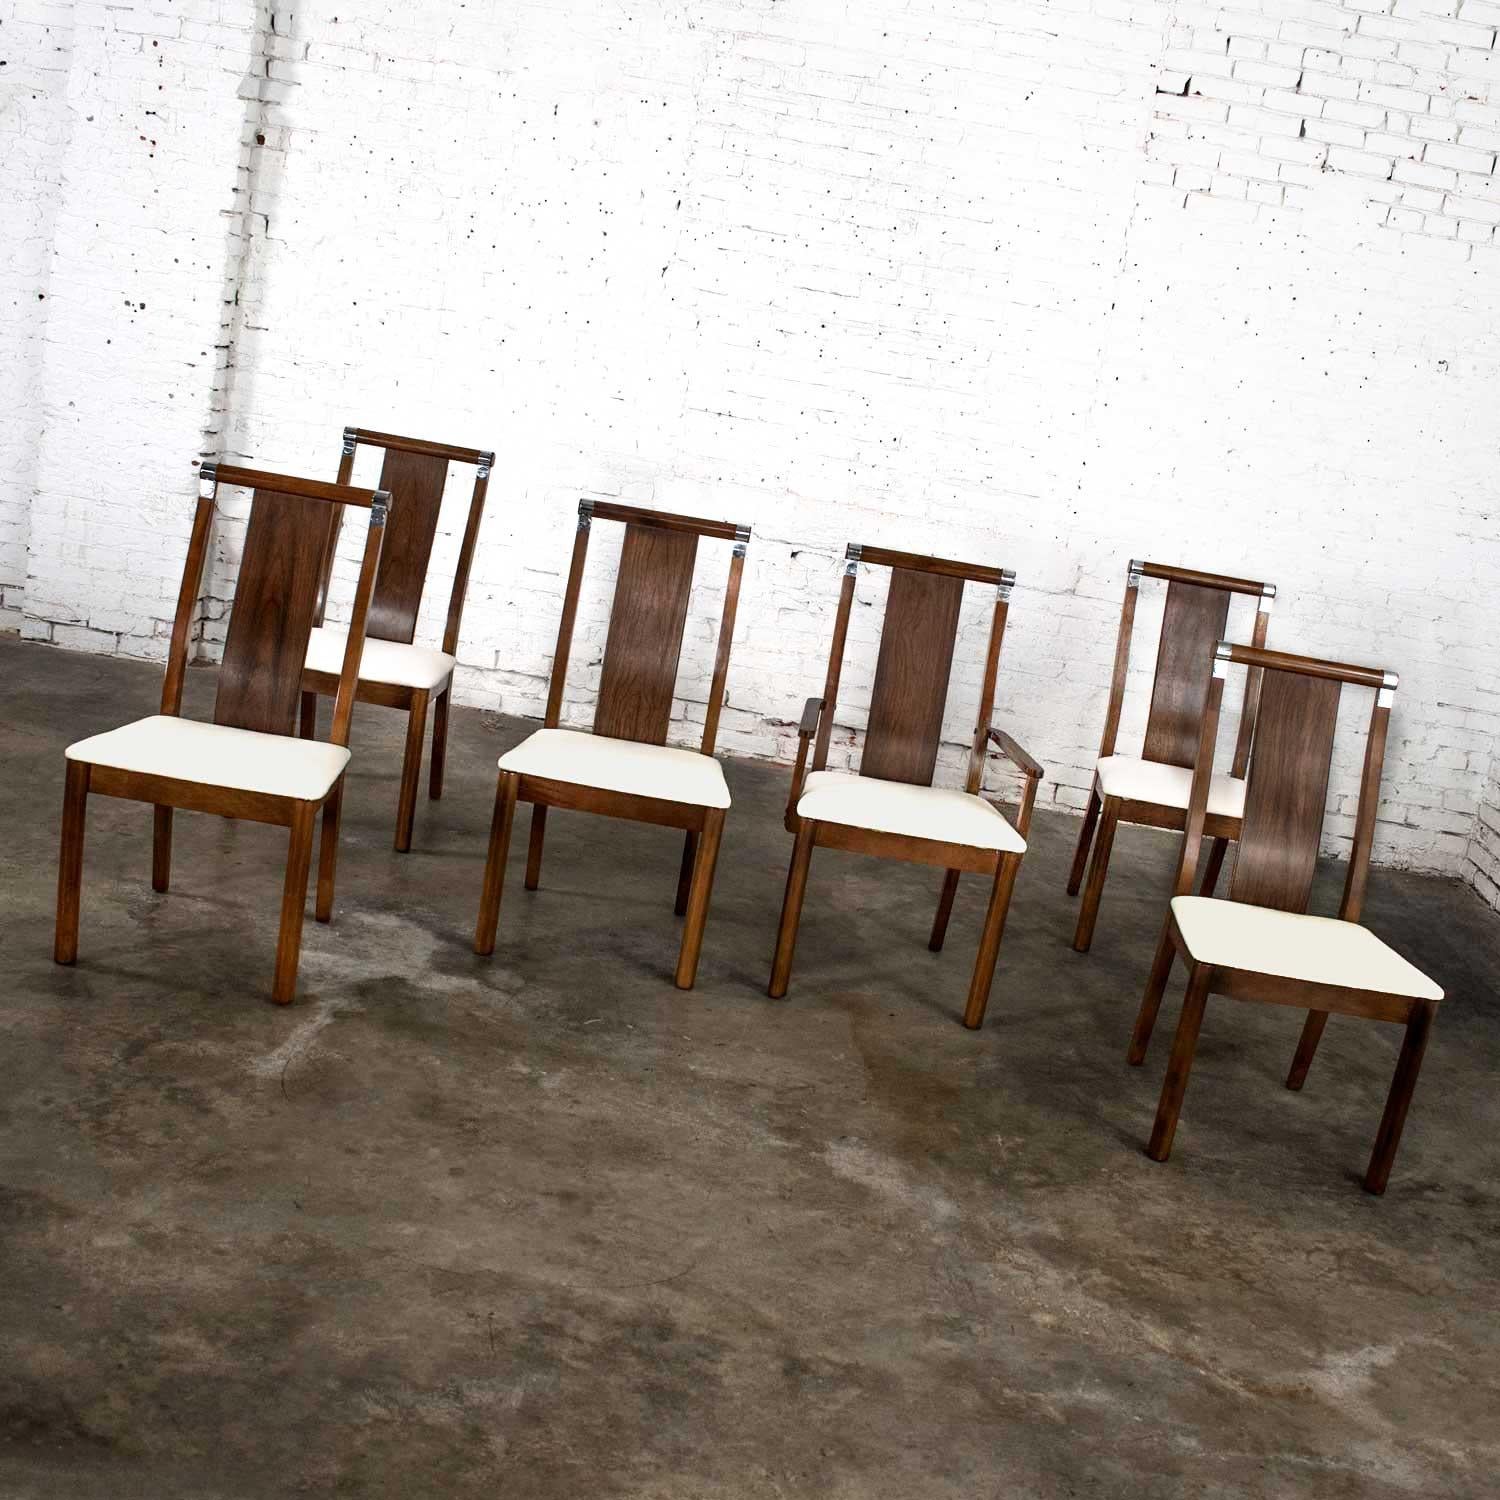 20th Century Mid-Century Modern Walnut Dining Chairs Set of 6 with Chrome Accents